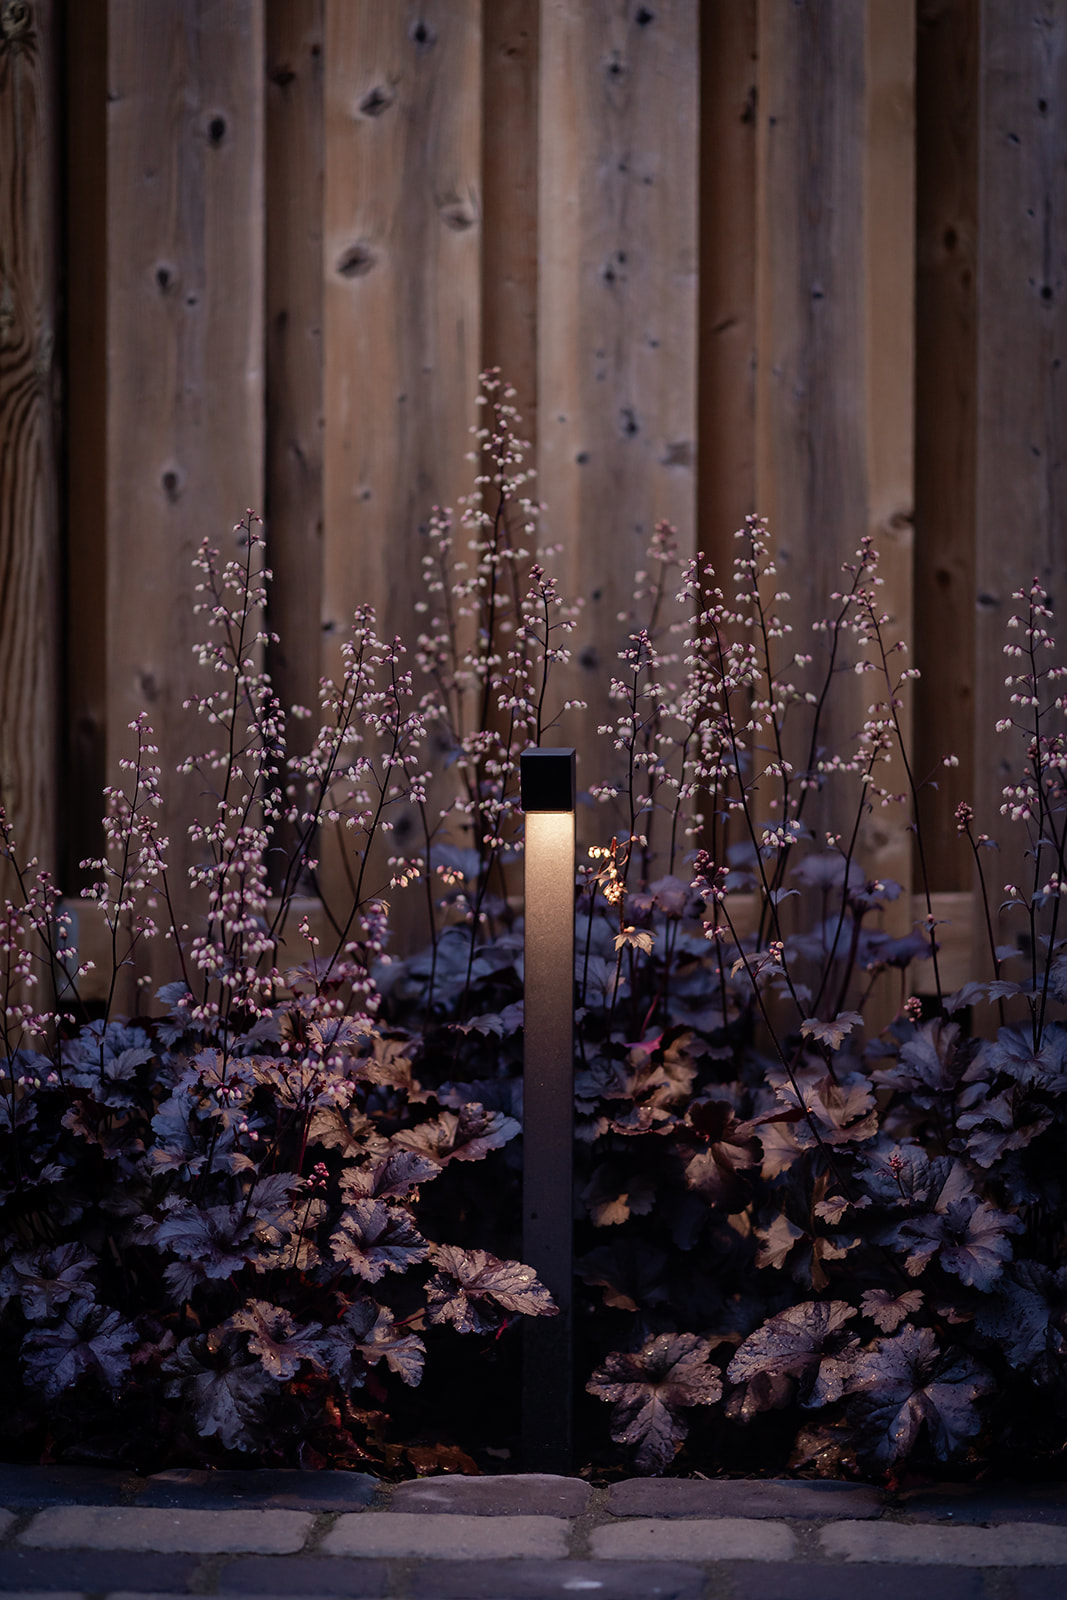 A lit lamp post in the garden.